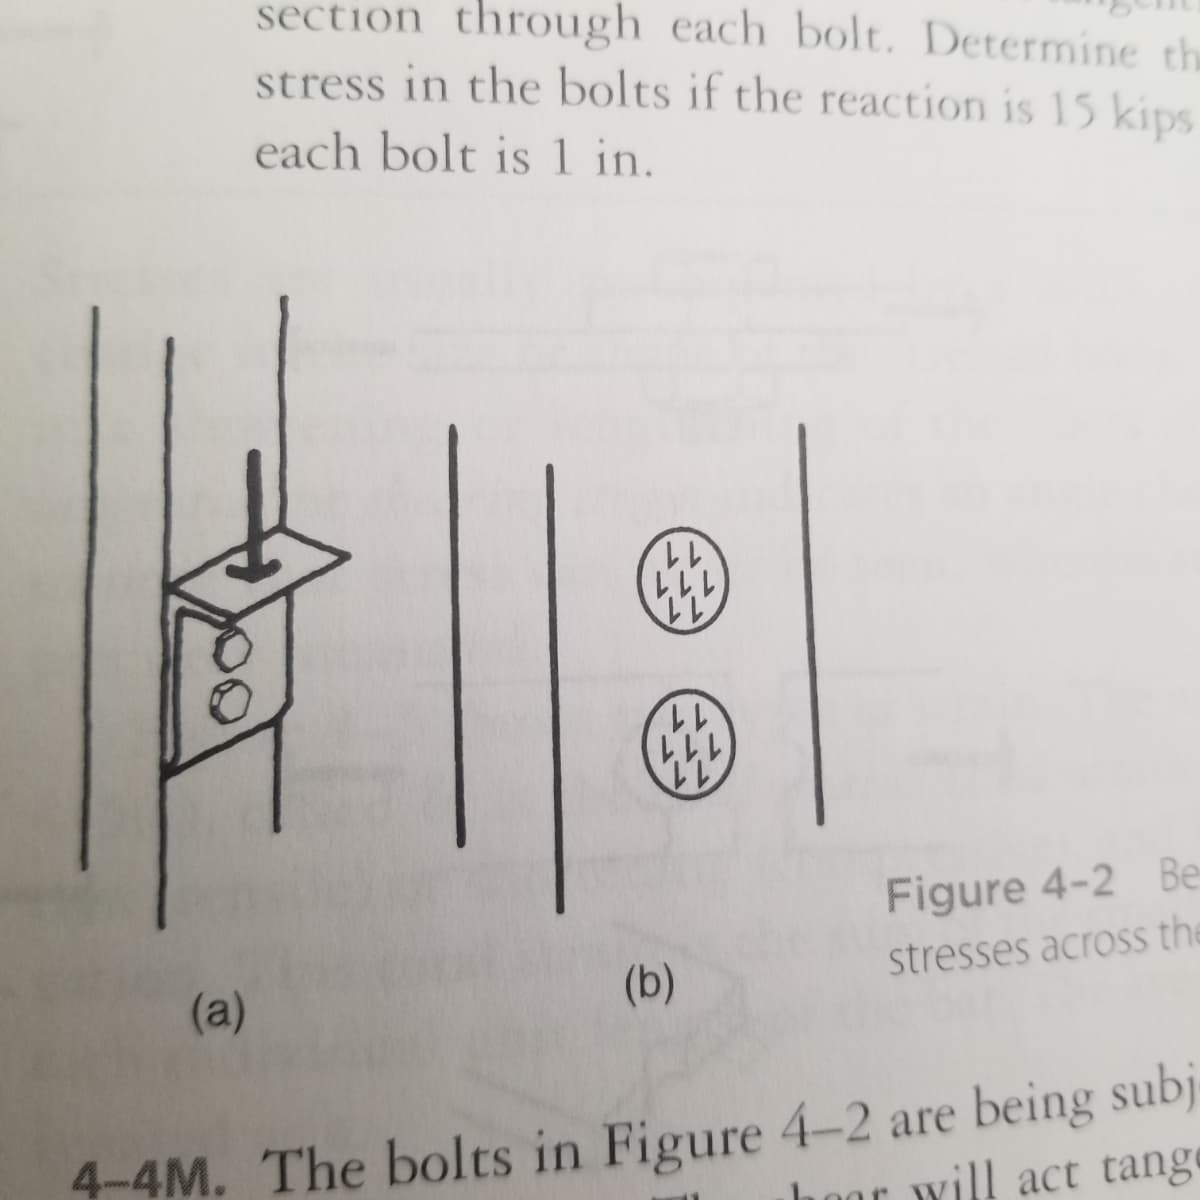 section through each bolt. Determine th
stress in the bolts if the reaction is 15 kips
each bolt is1 in.
11
111
11
Figure 4-2 Be
(b)
stresses across the
(a)
4-4M. The bolts in Figure 4-2 are being subj
will act tange
